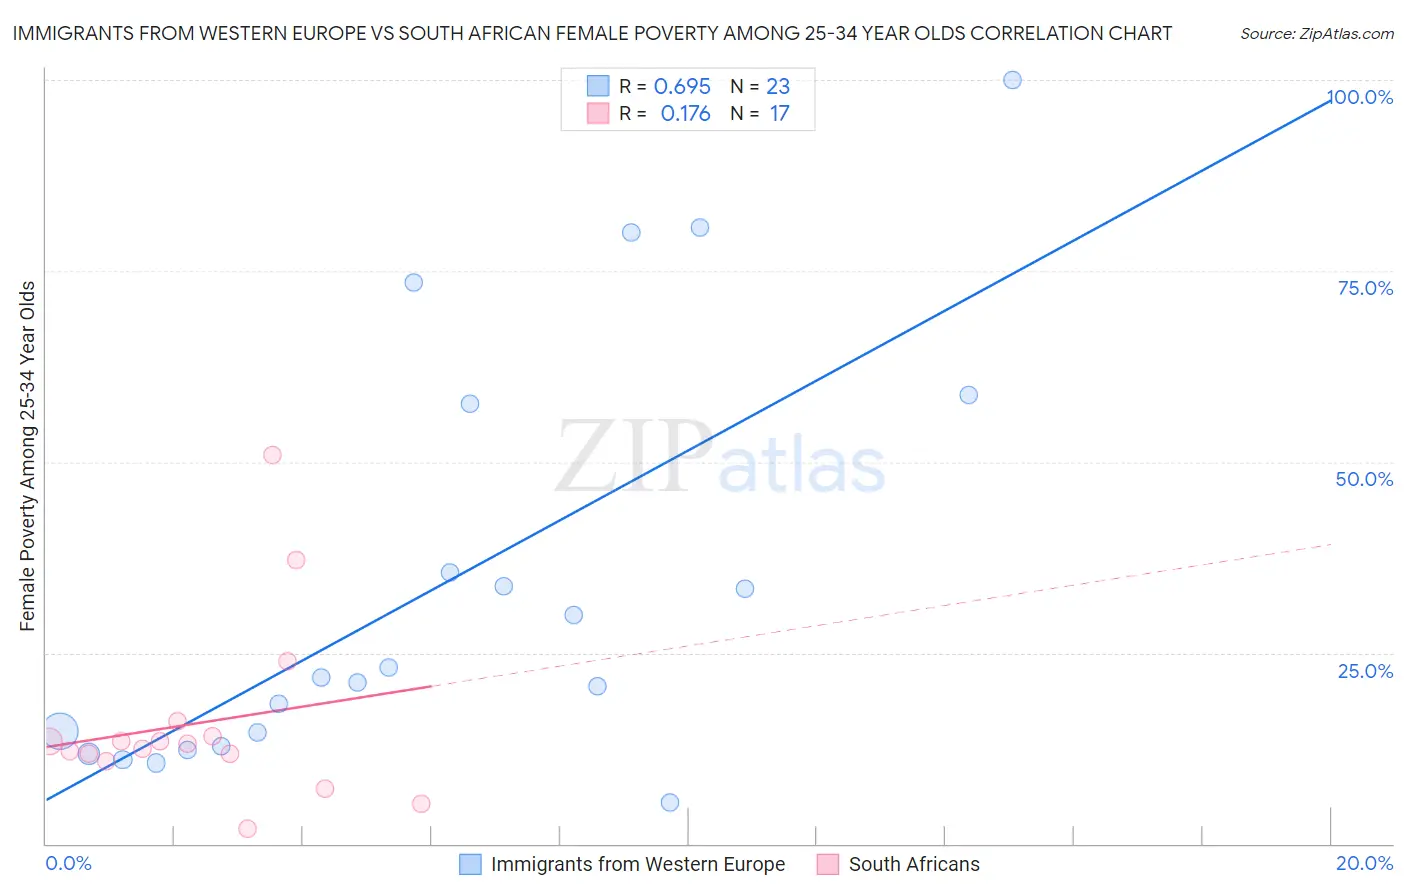 Immigrants from Western Europe vs South African Female Poverty Among 25-34 Year Olds